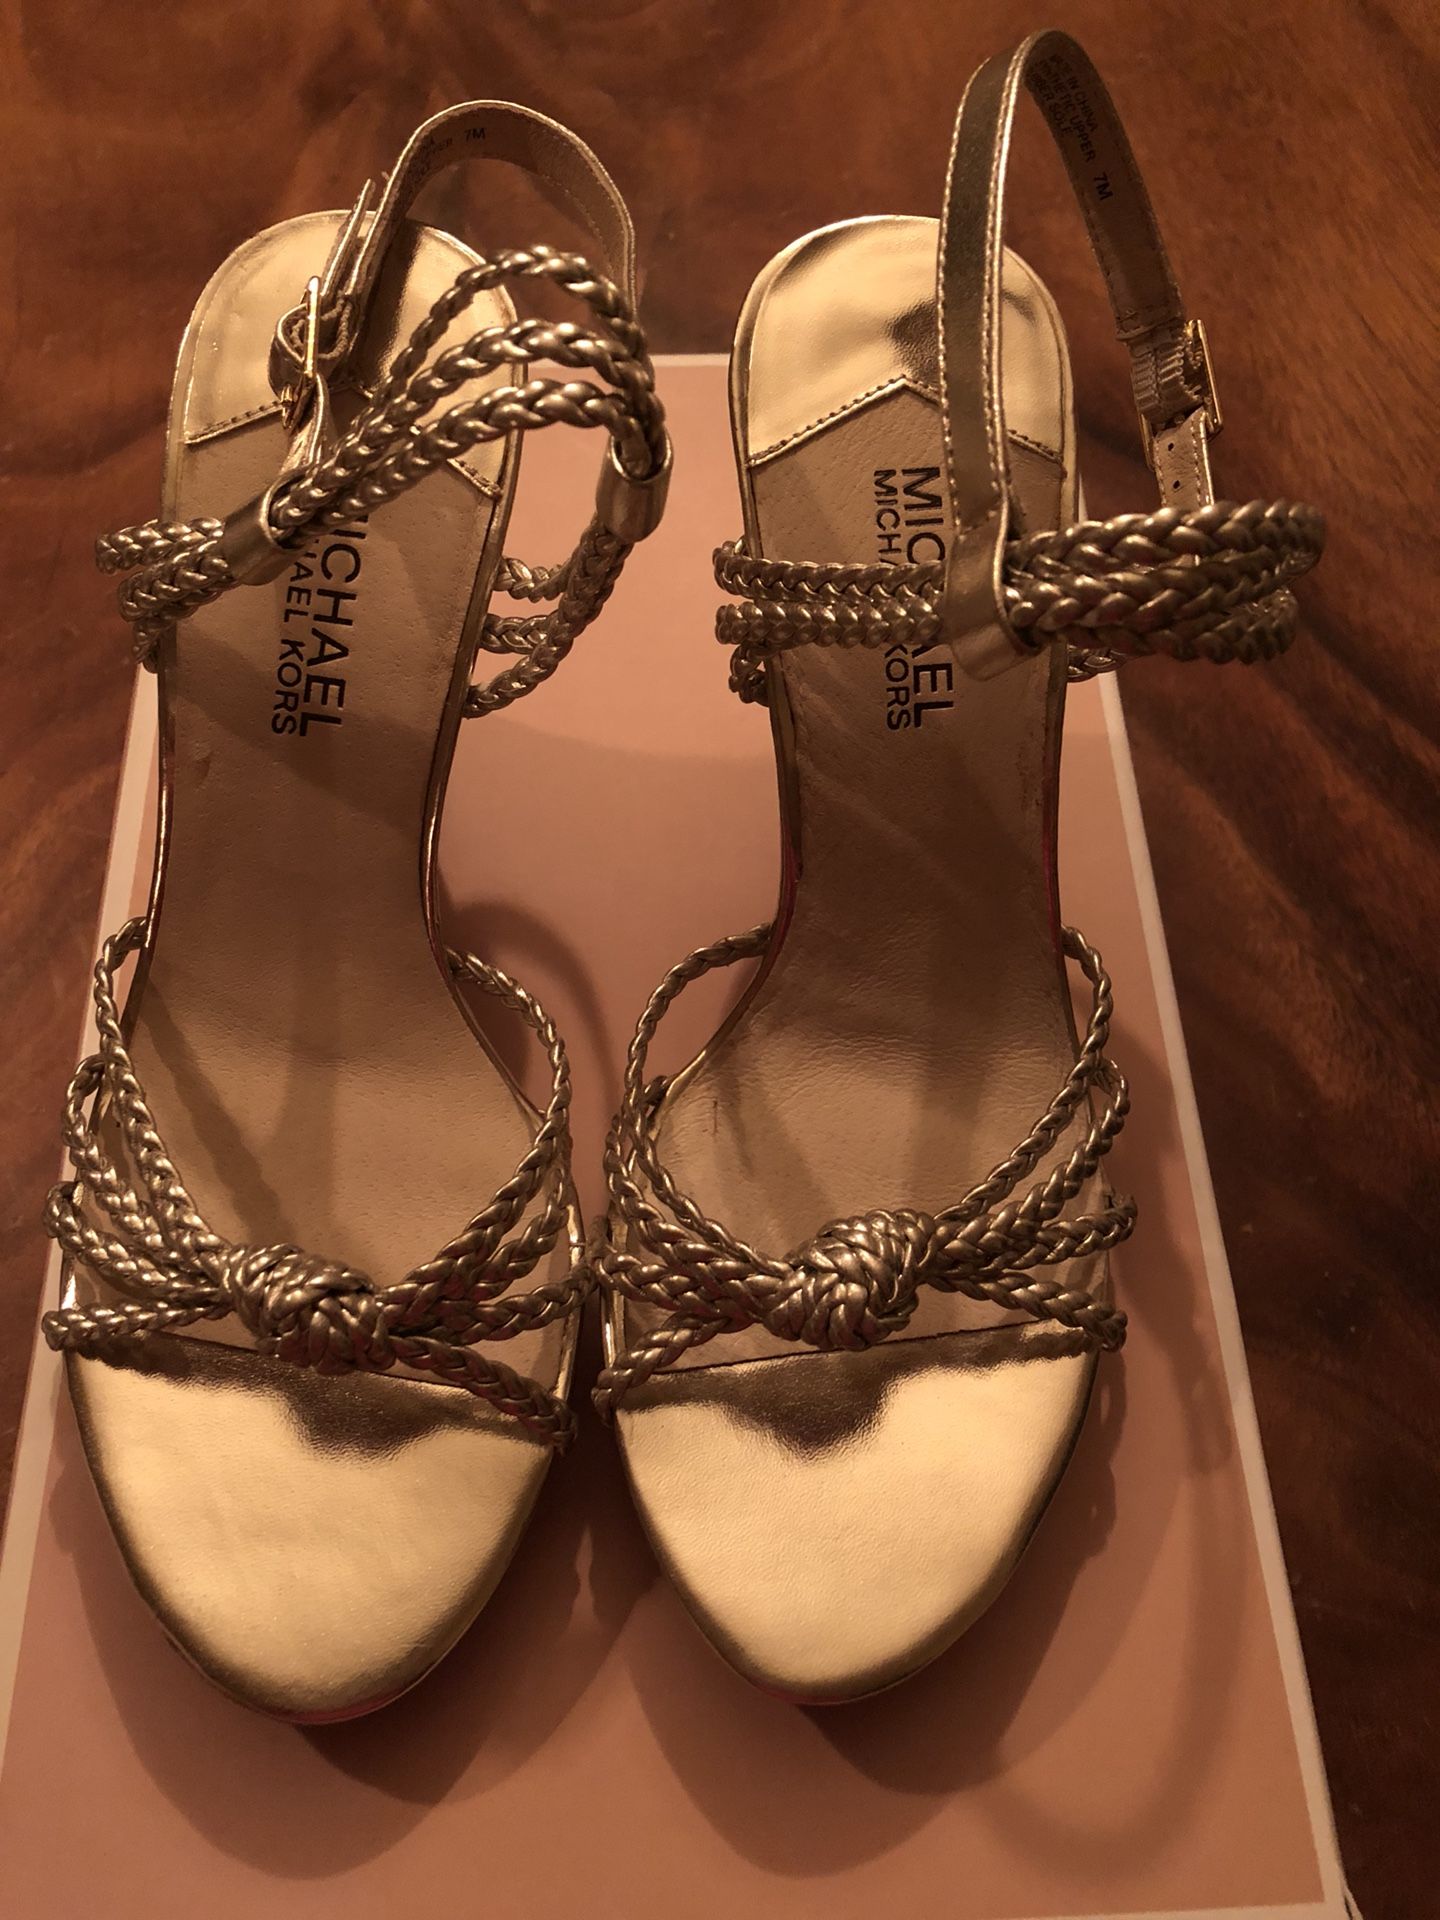 Michael Kors gold wedge heels size 7 - brand new in box